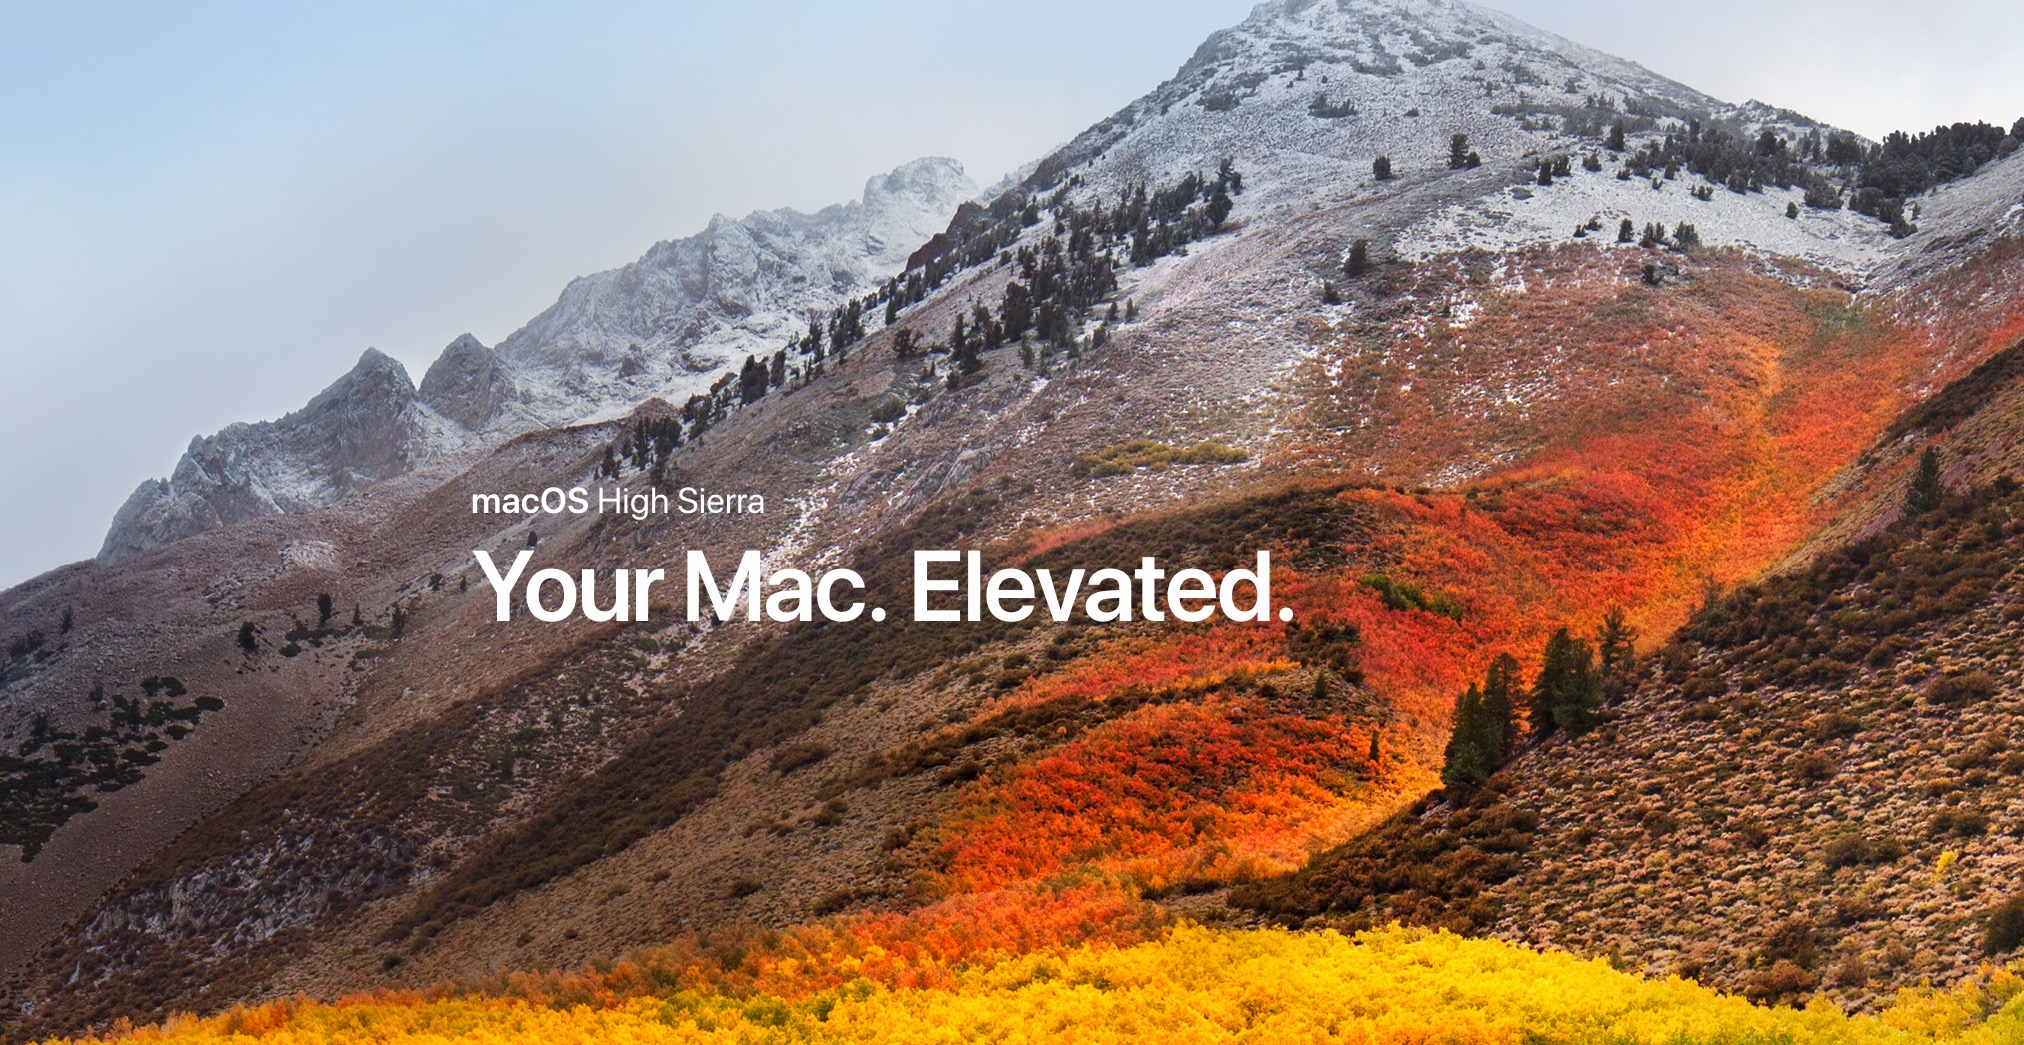 What would you still ned macos high sierra for macbook pro